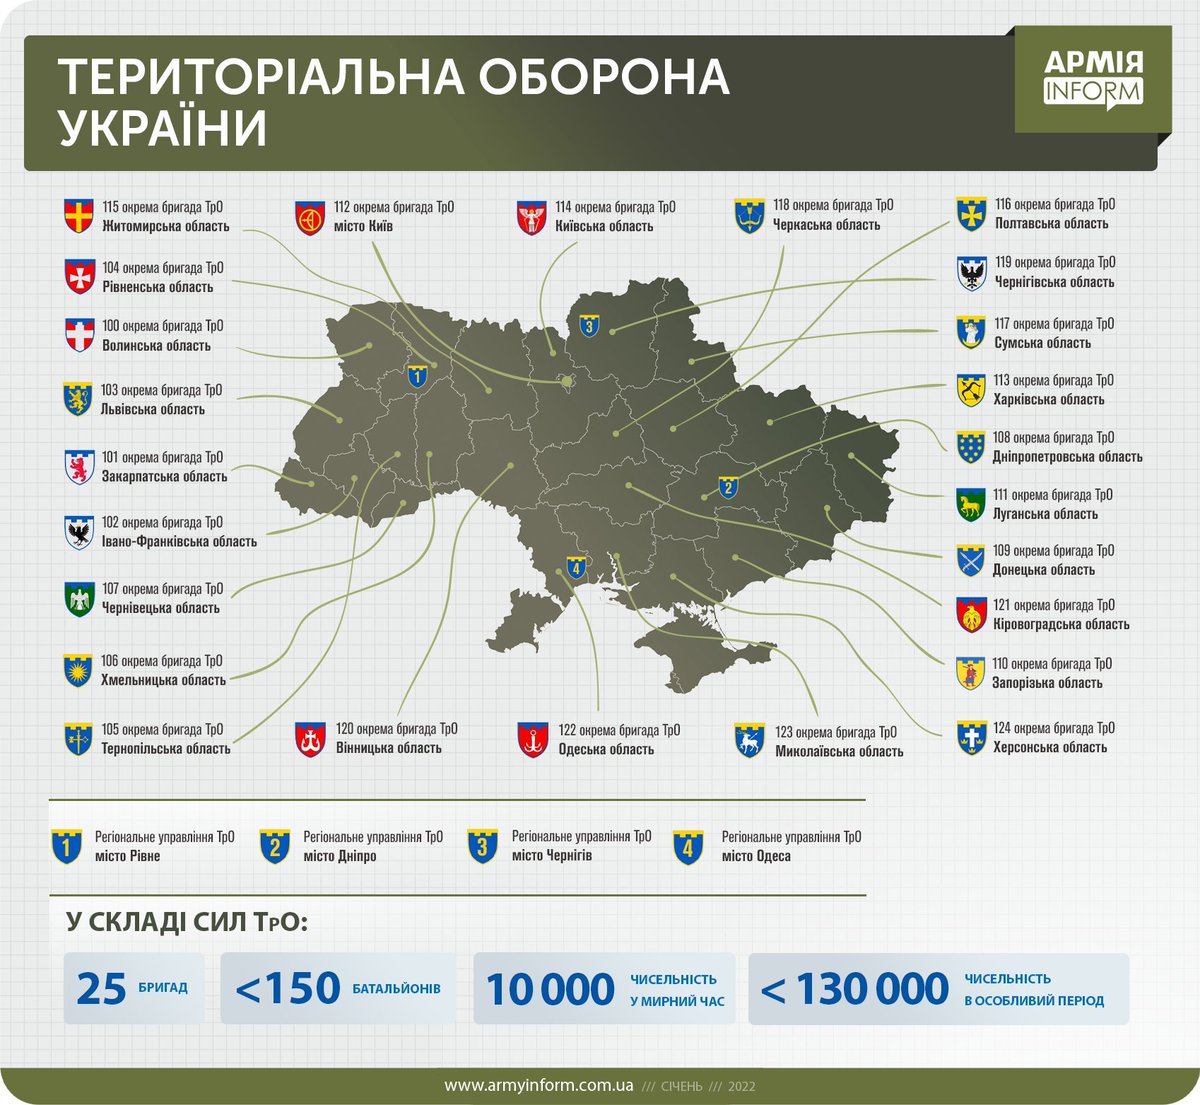 In Ukraine, the Defence Ministry @DefenceU is intensifying setting up territorial defence forces. They will include 25 brigades and 150 battalions. During peace time, they will consist of 10,000 people - but 130,000 in case of war